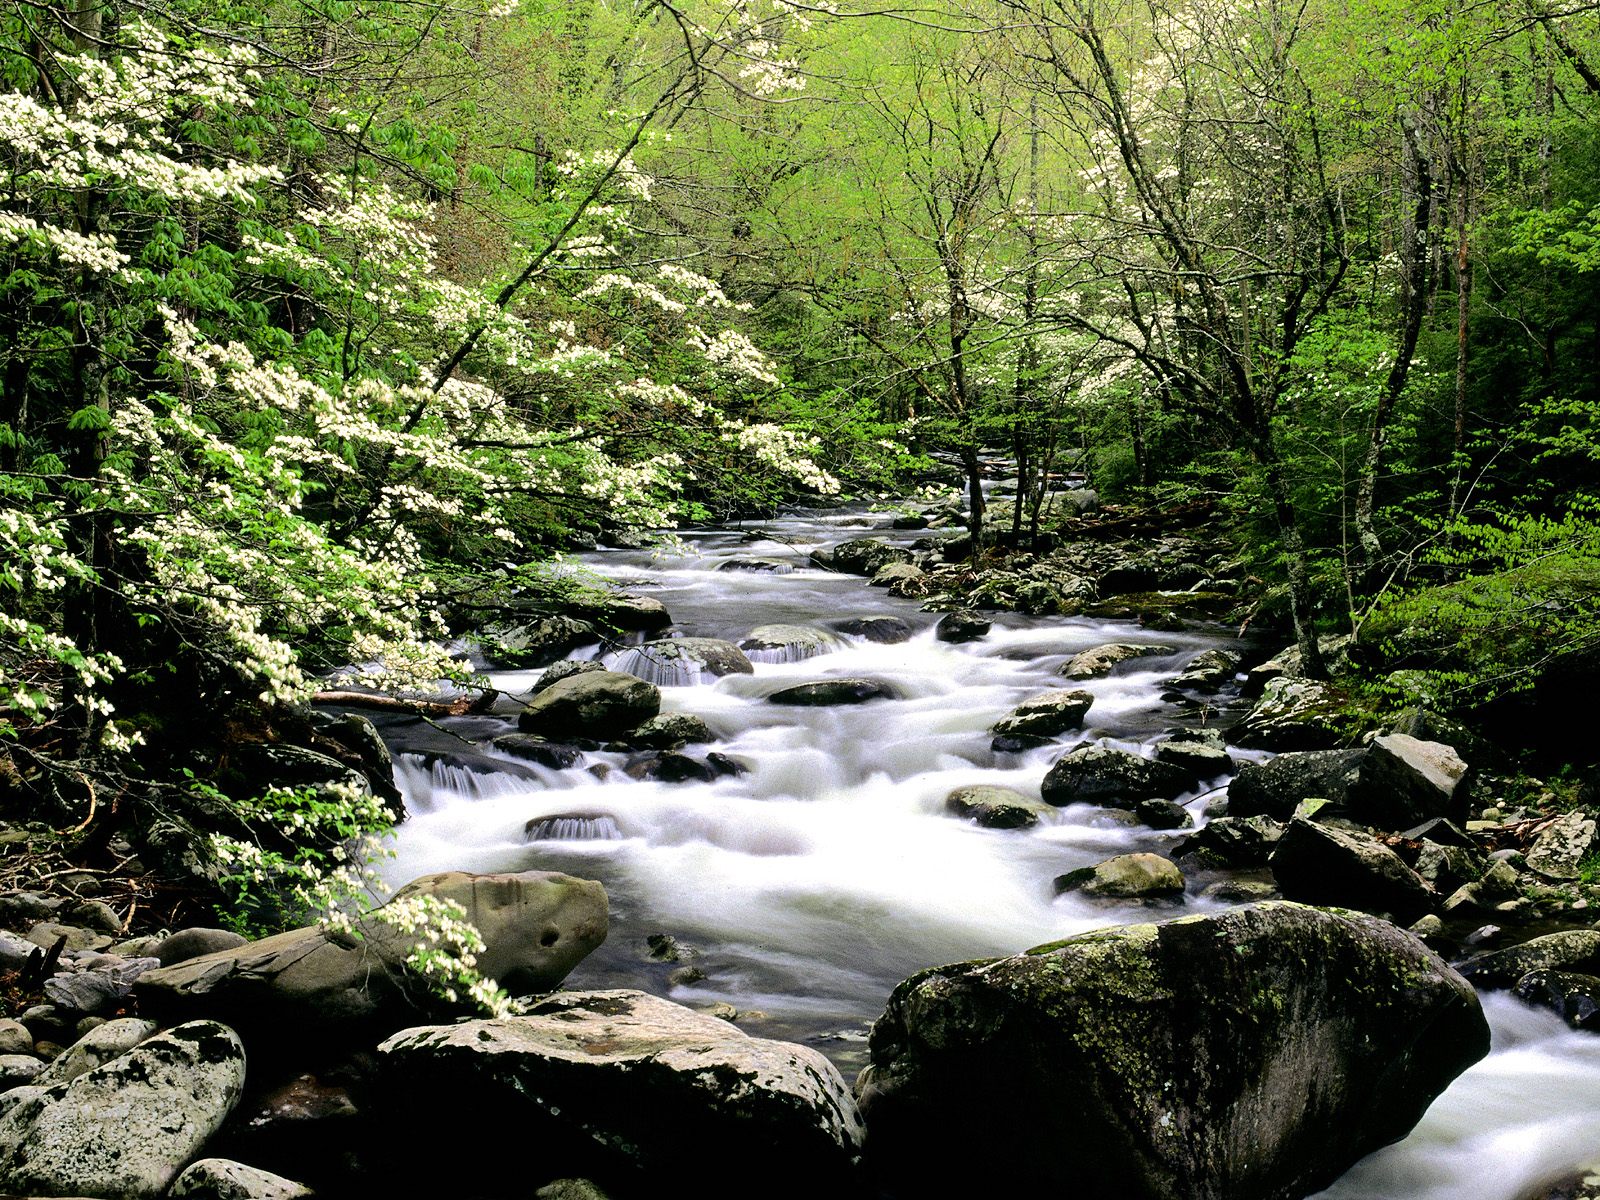 Download wallpaper Middle Prong River Great Smoky Mountains